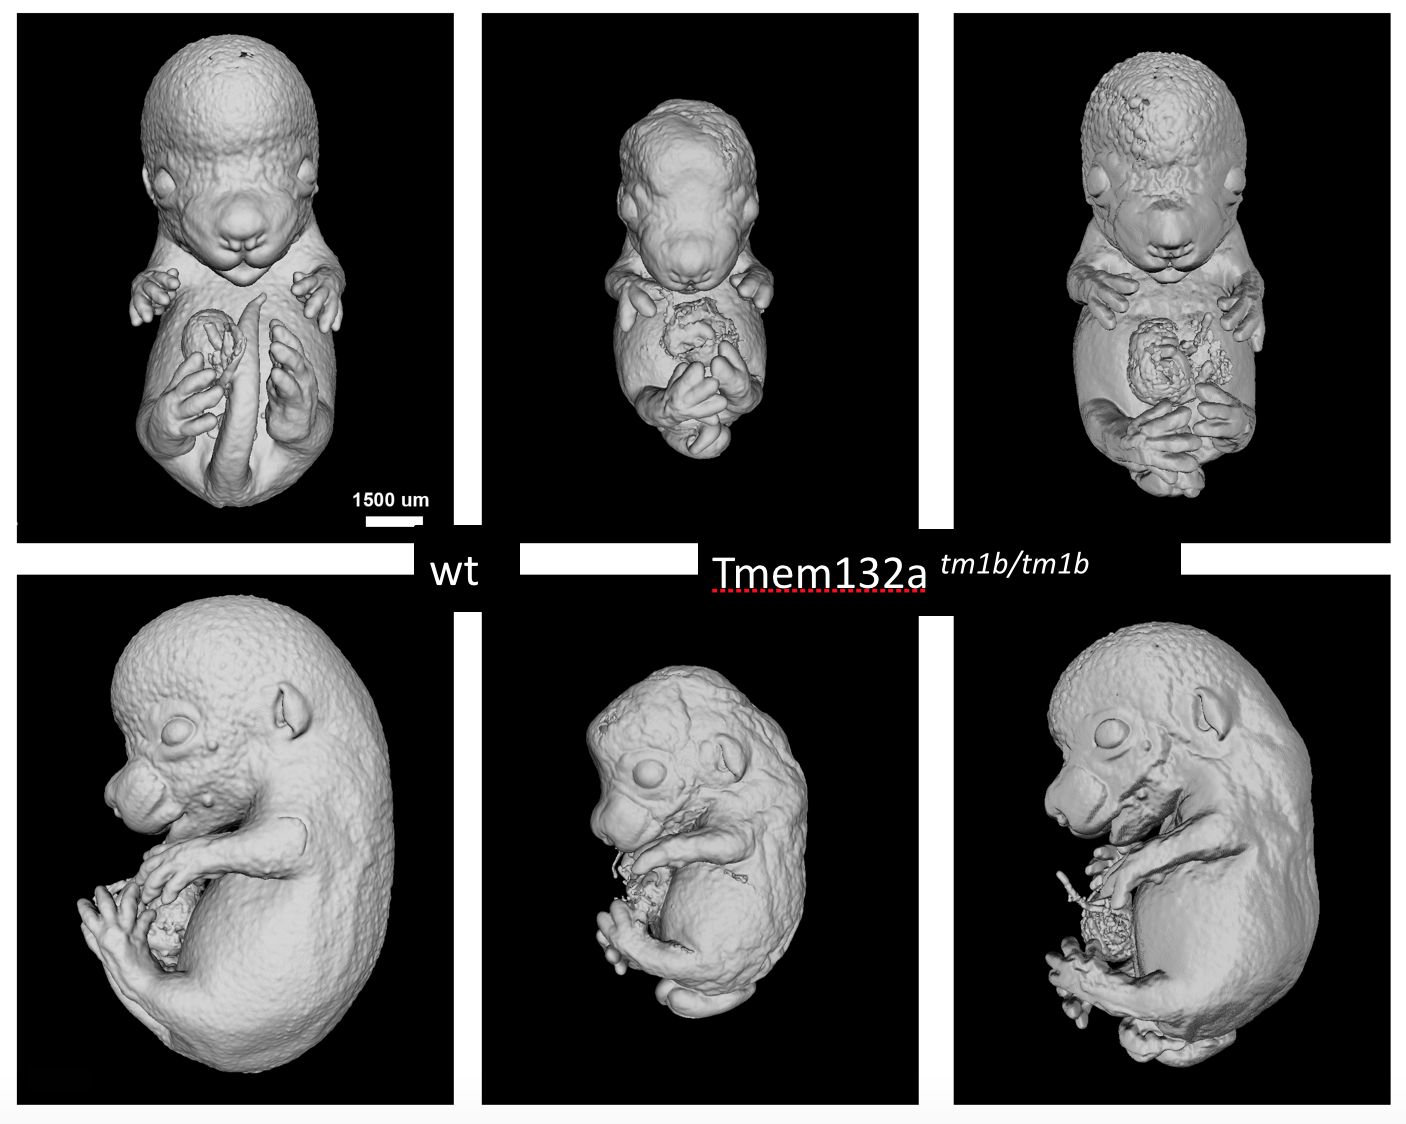 Surface renderings of  microCT volumes of Tmem132a mutants compared to wildtype littermates